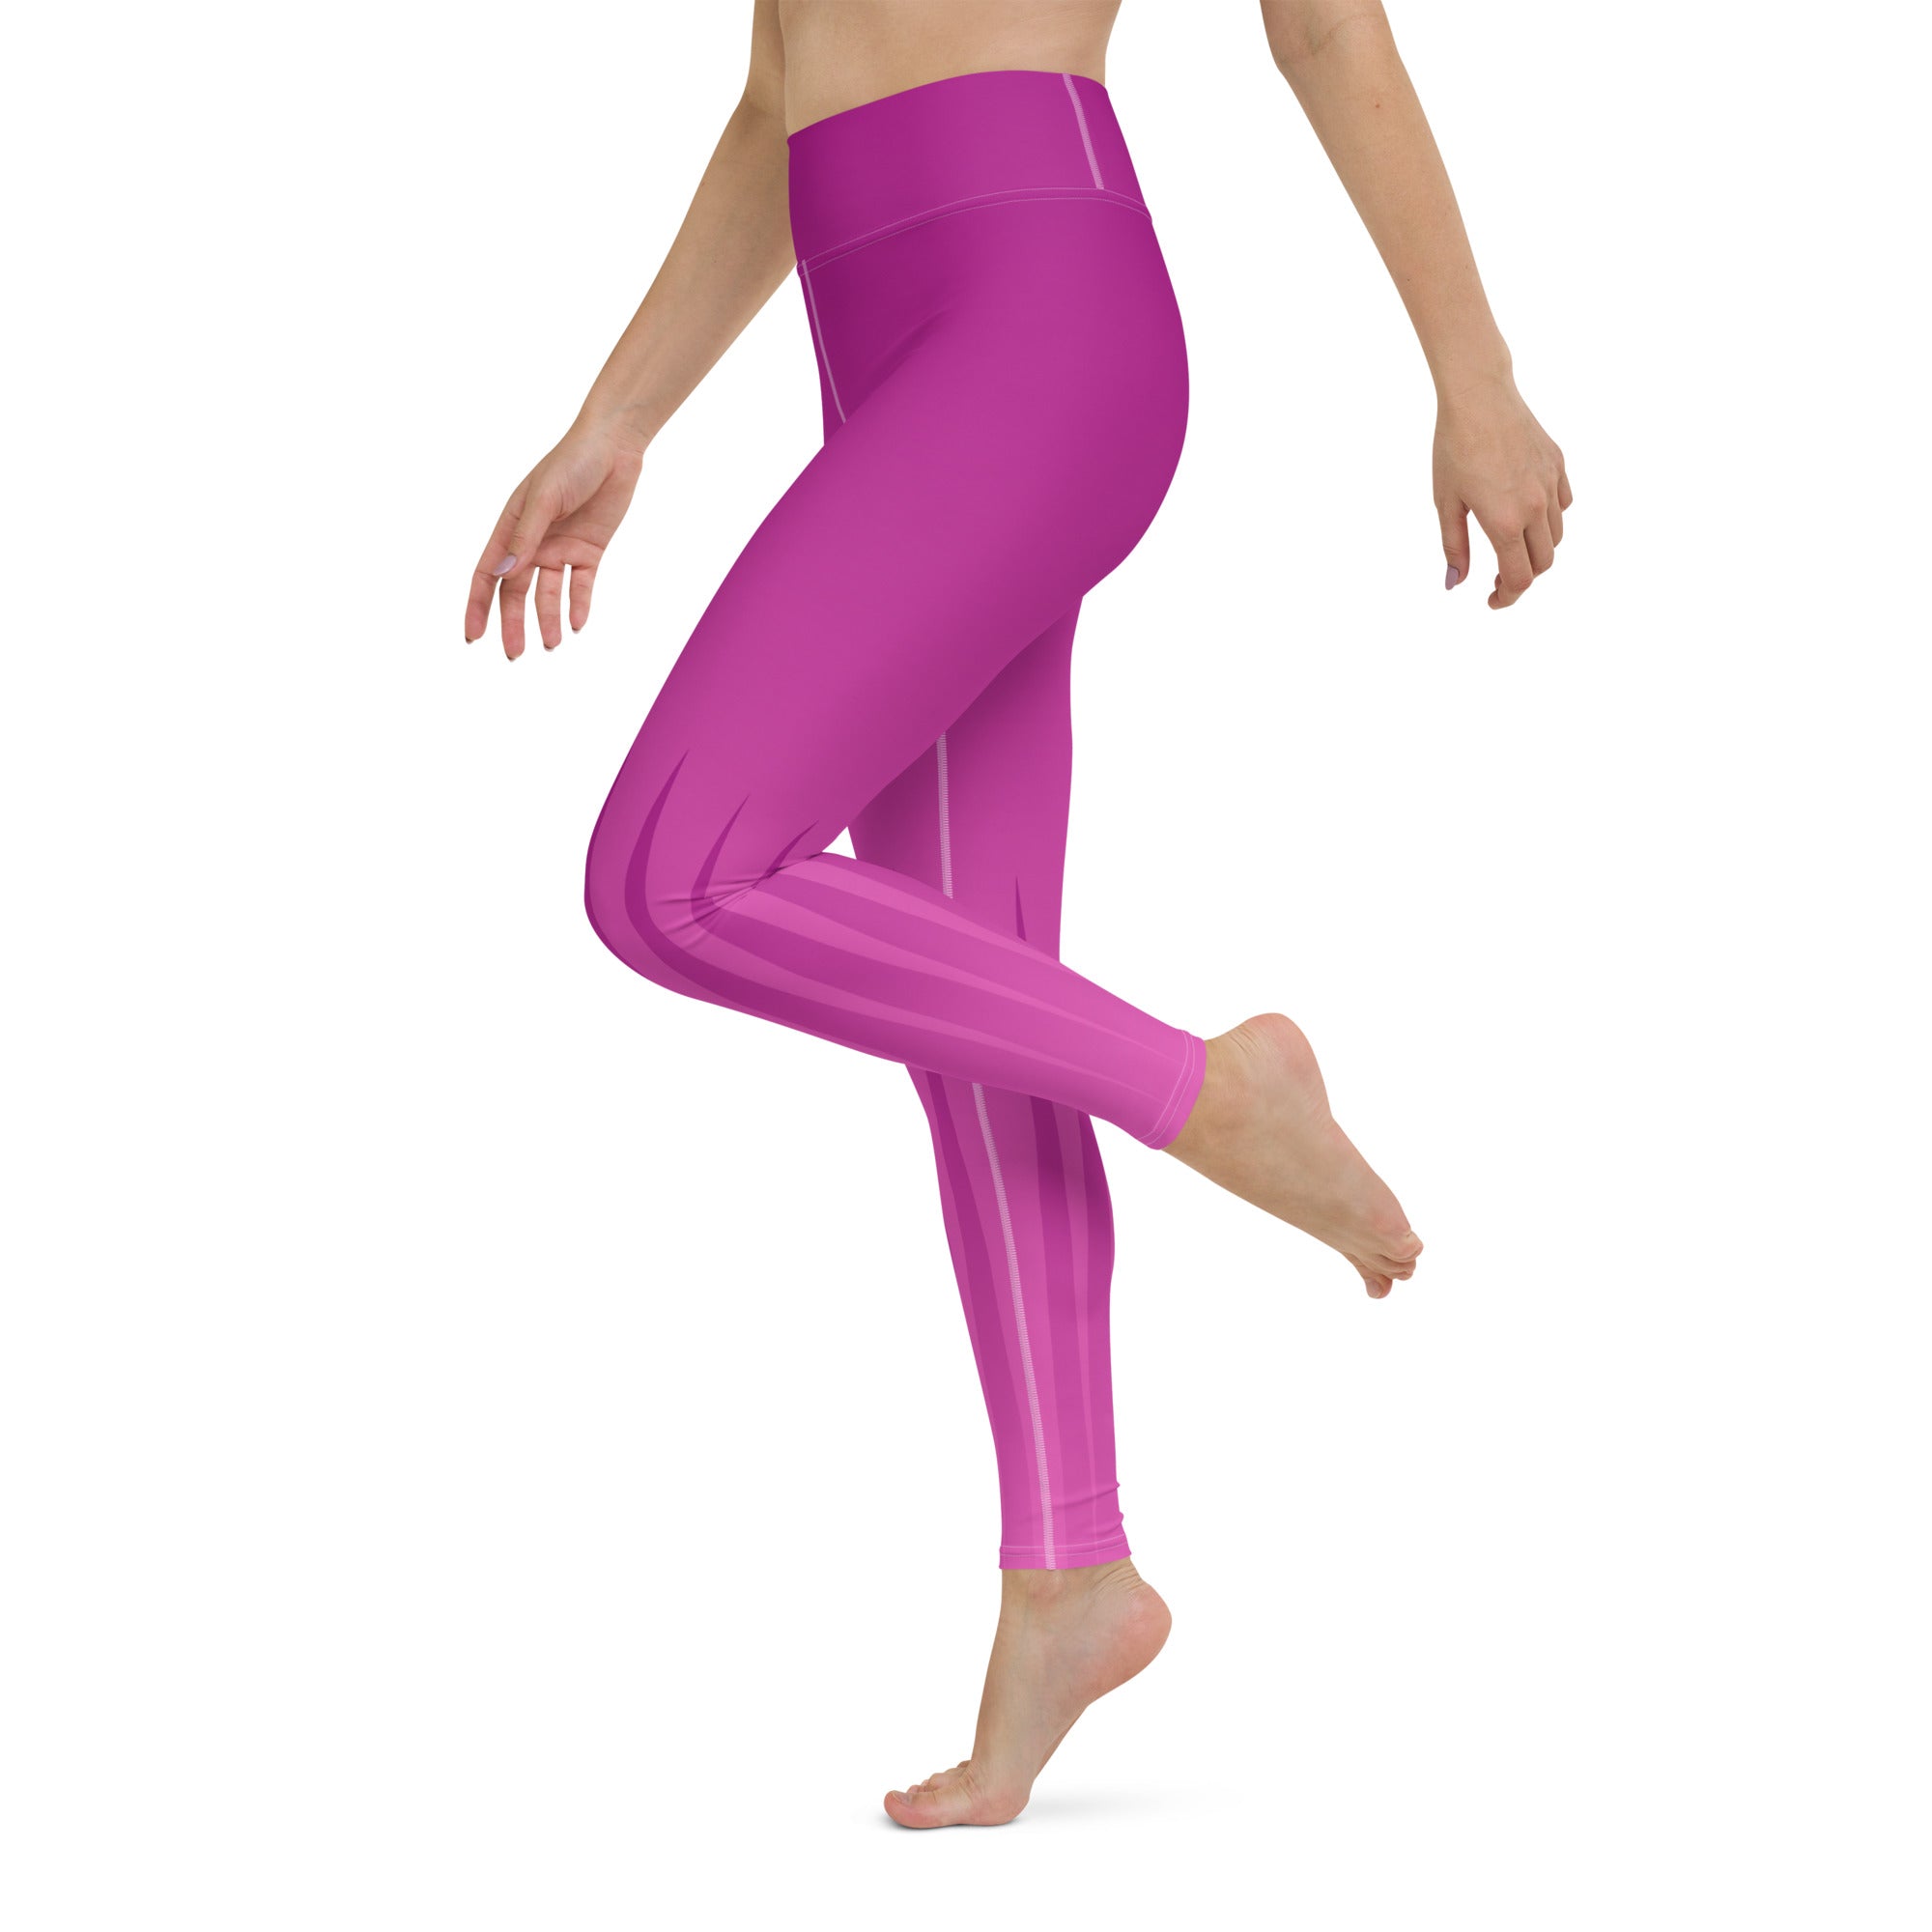 Coral Reef Leggings: Where marine beauty meets yoga, offering a serene backdrop for your poses and stretches.